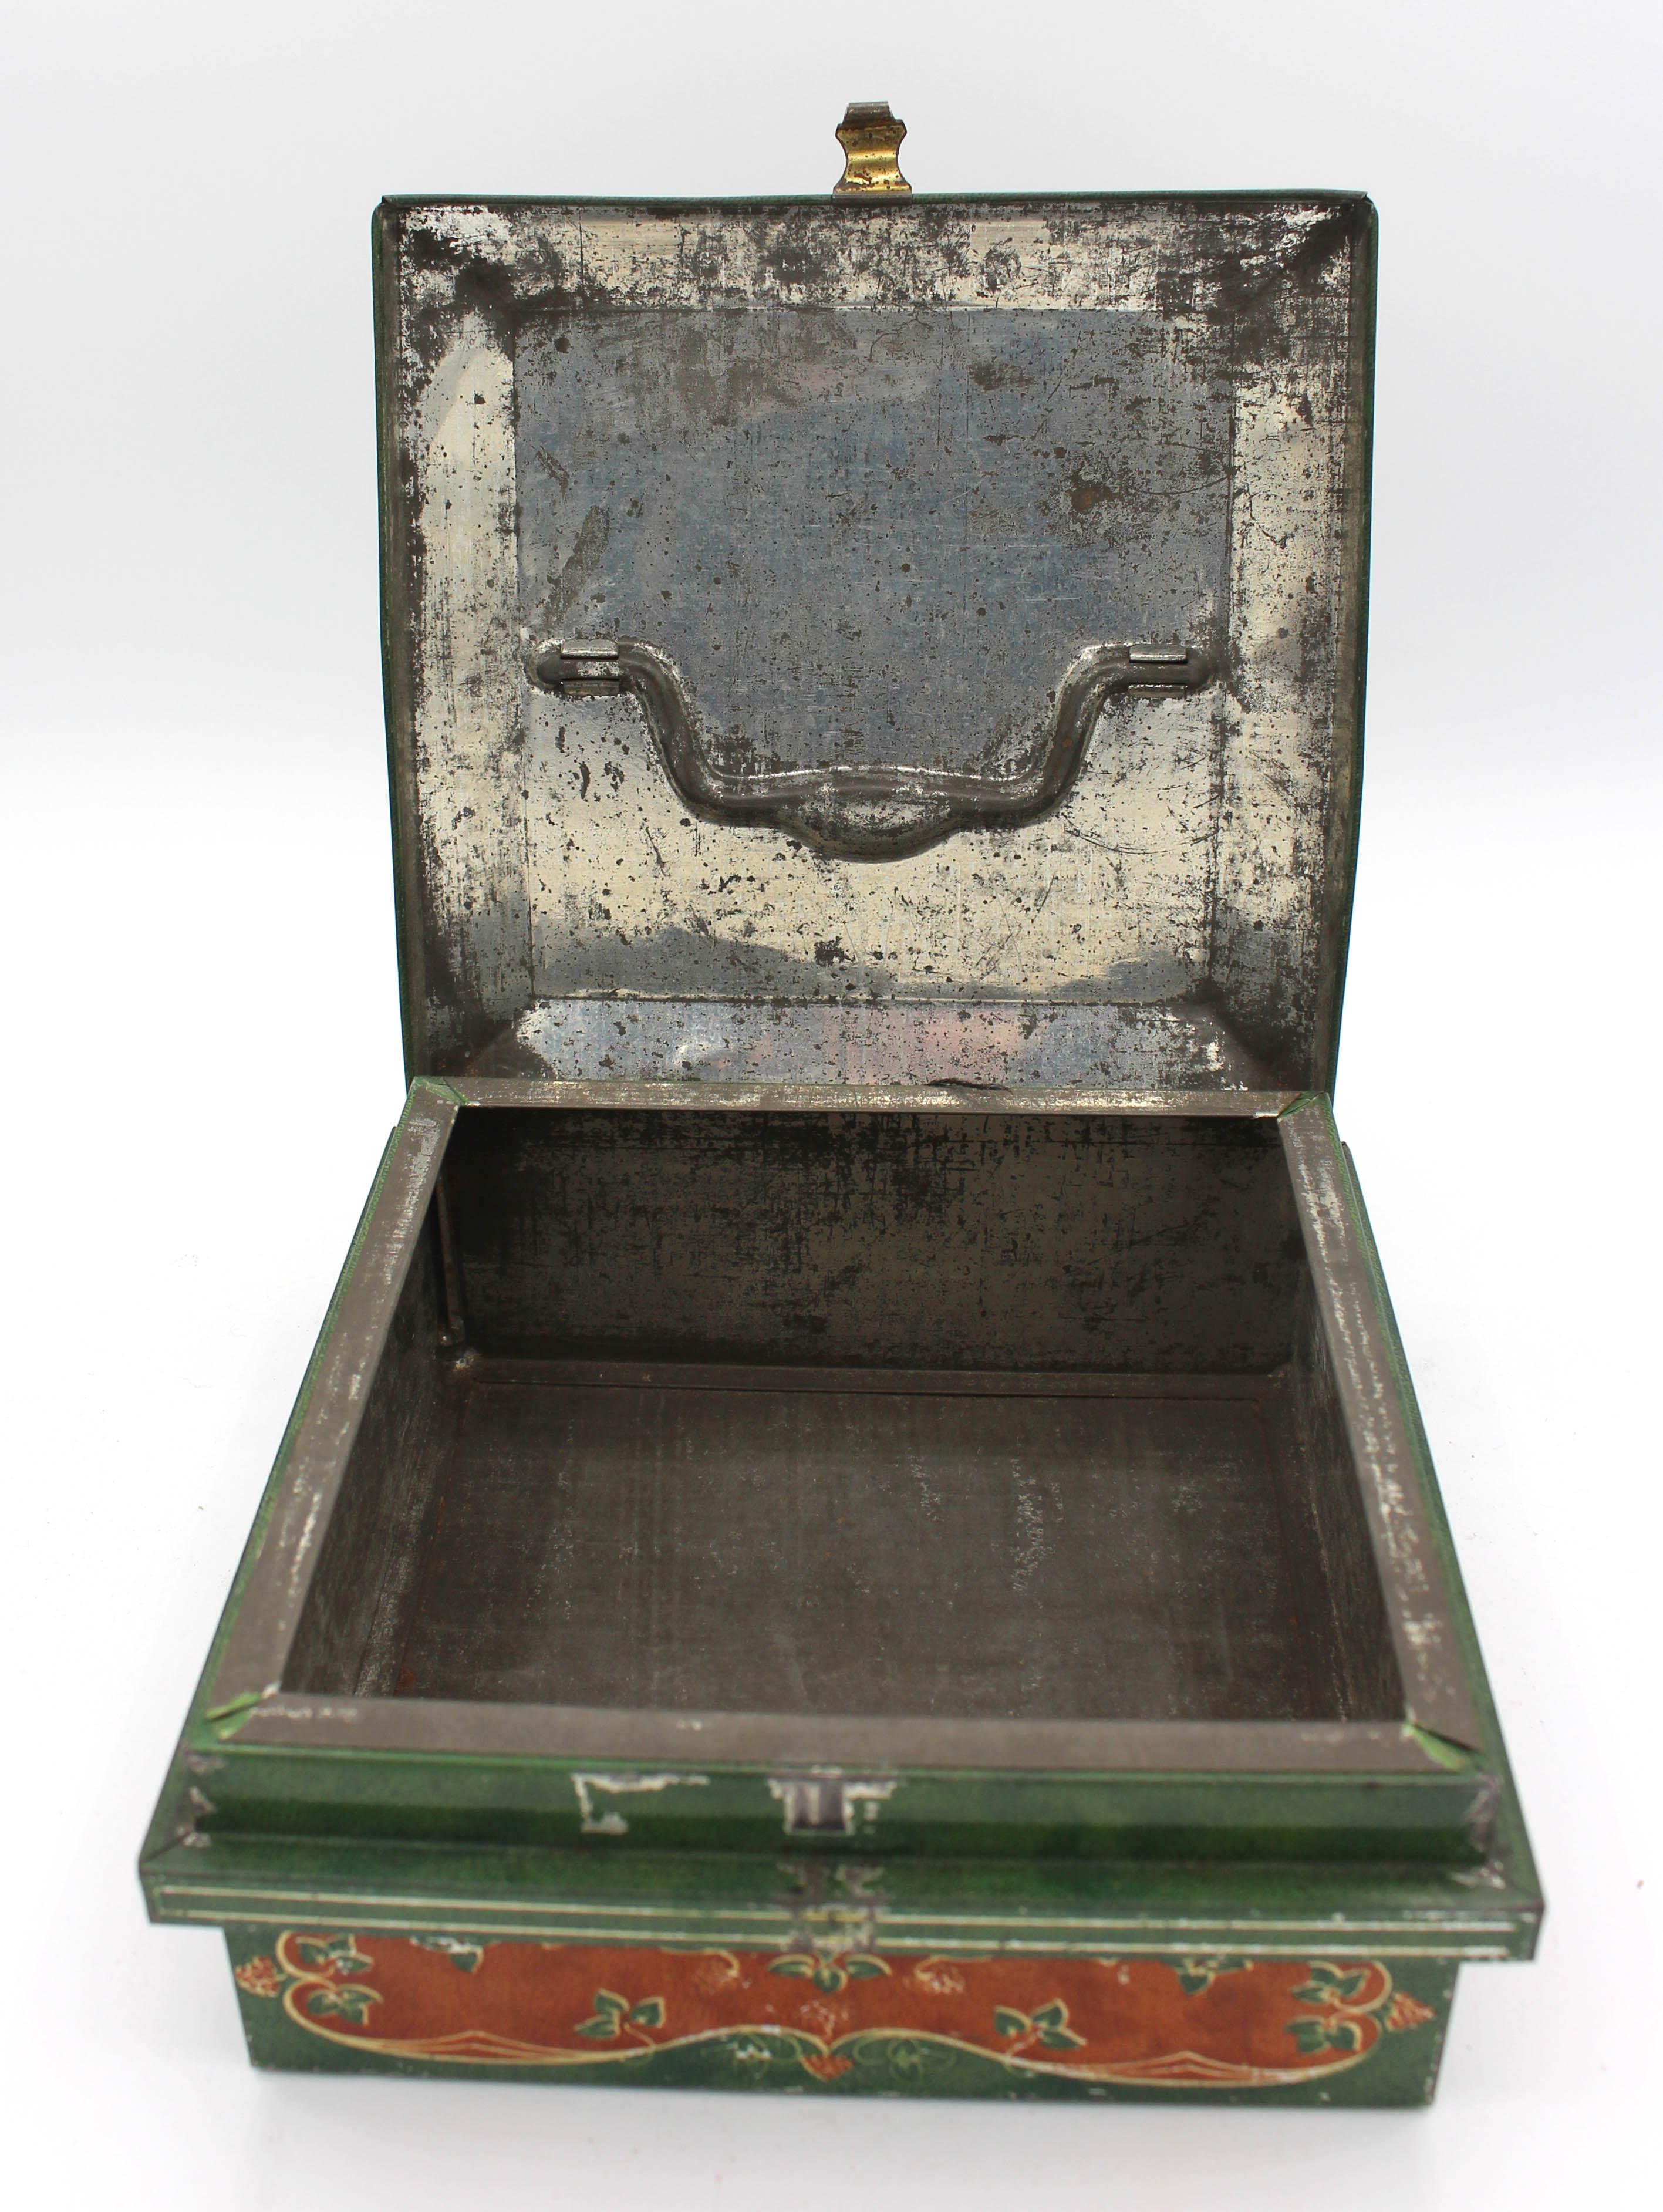 20th Century 1903 Huntley & Palmers Jewelry Casket Form Biscuit Tin Box For Sale